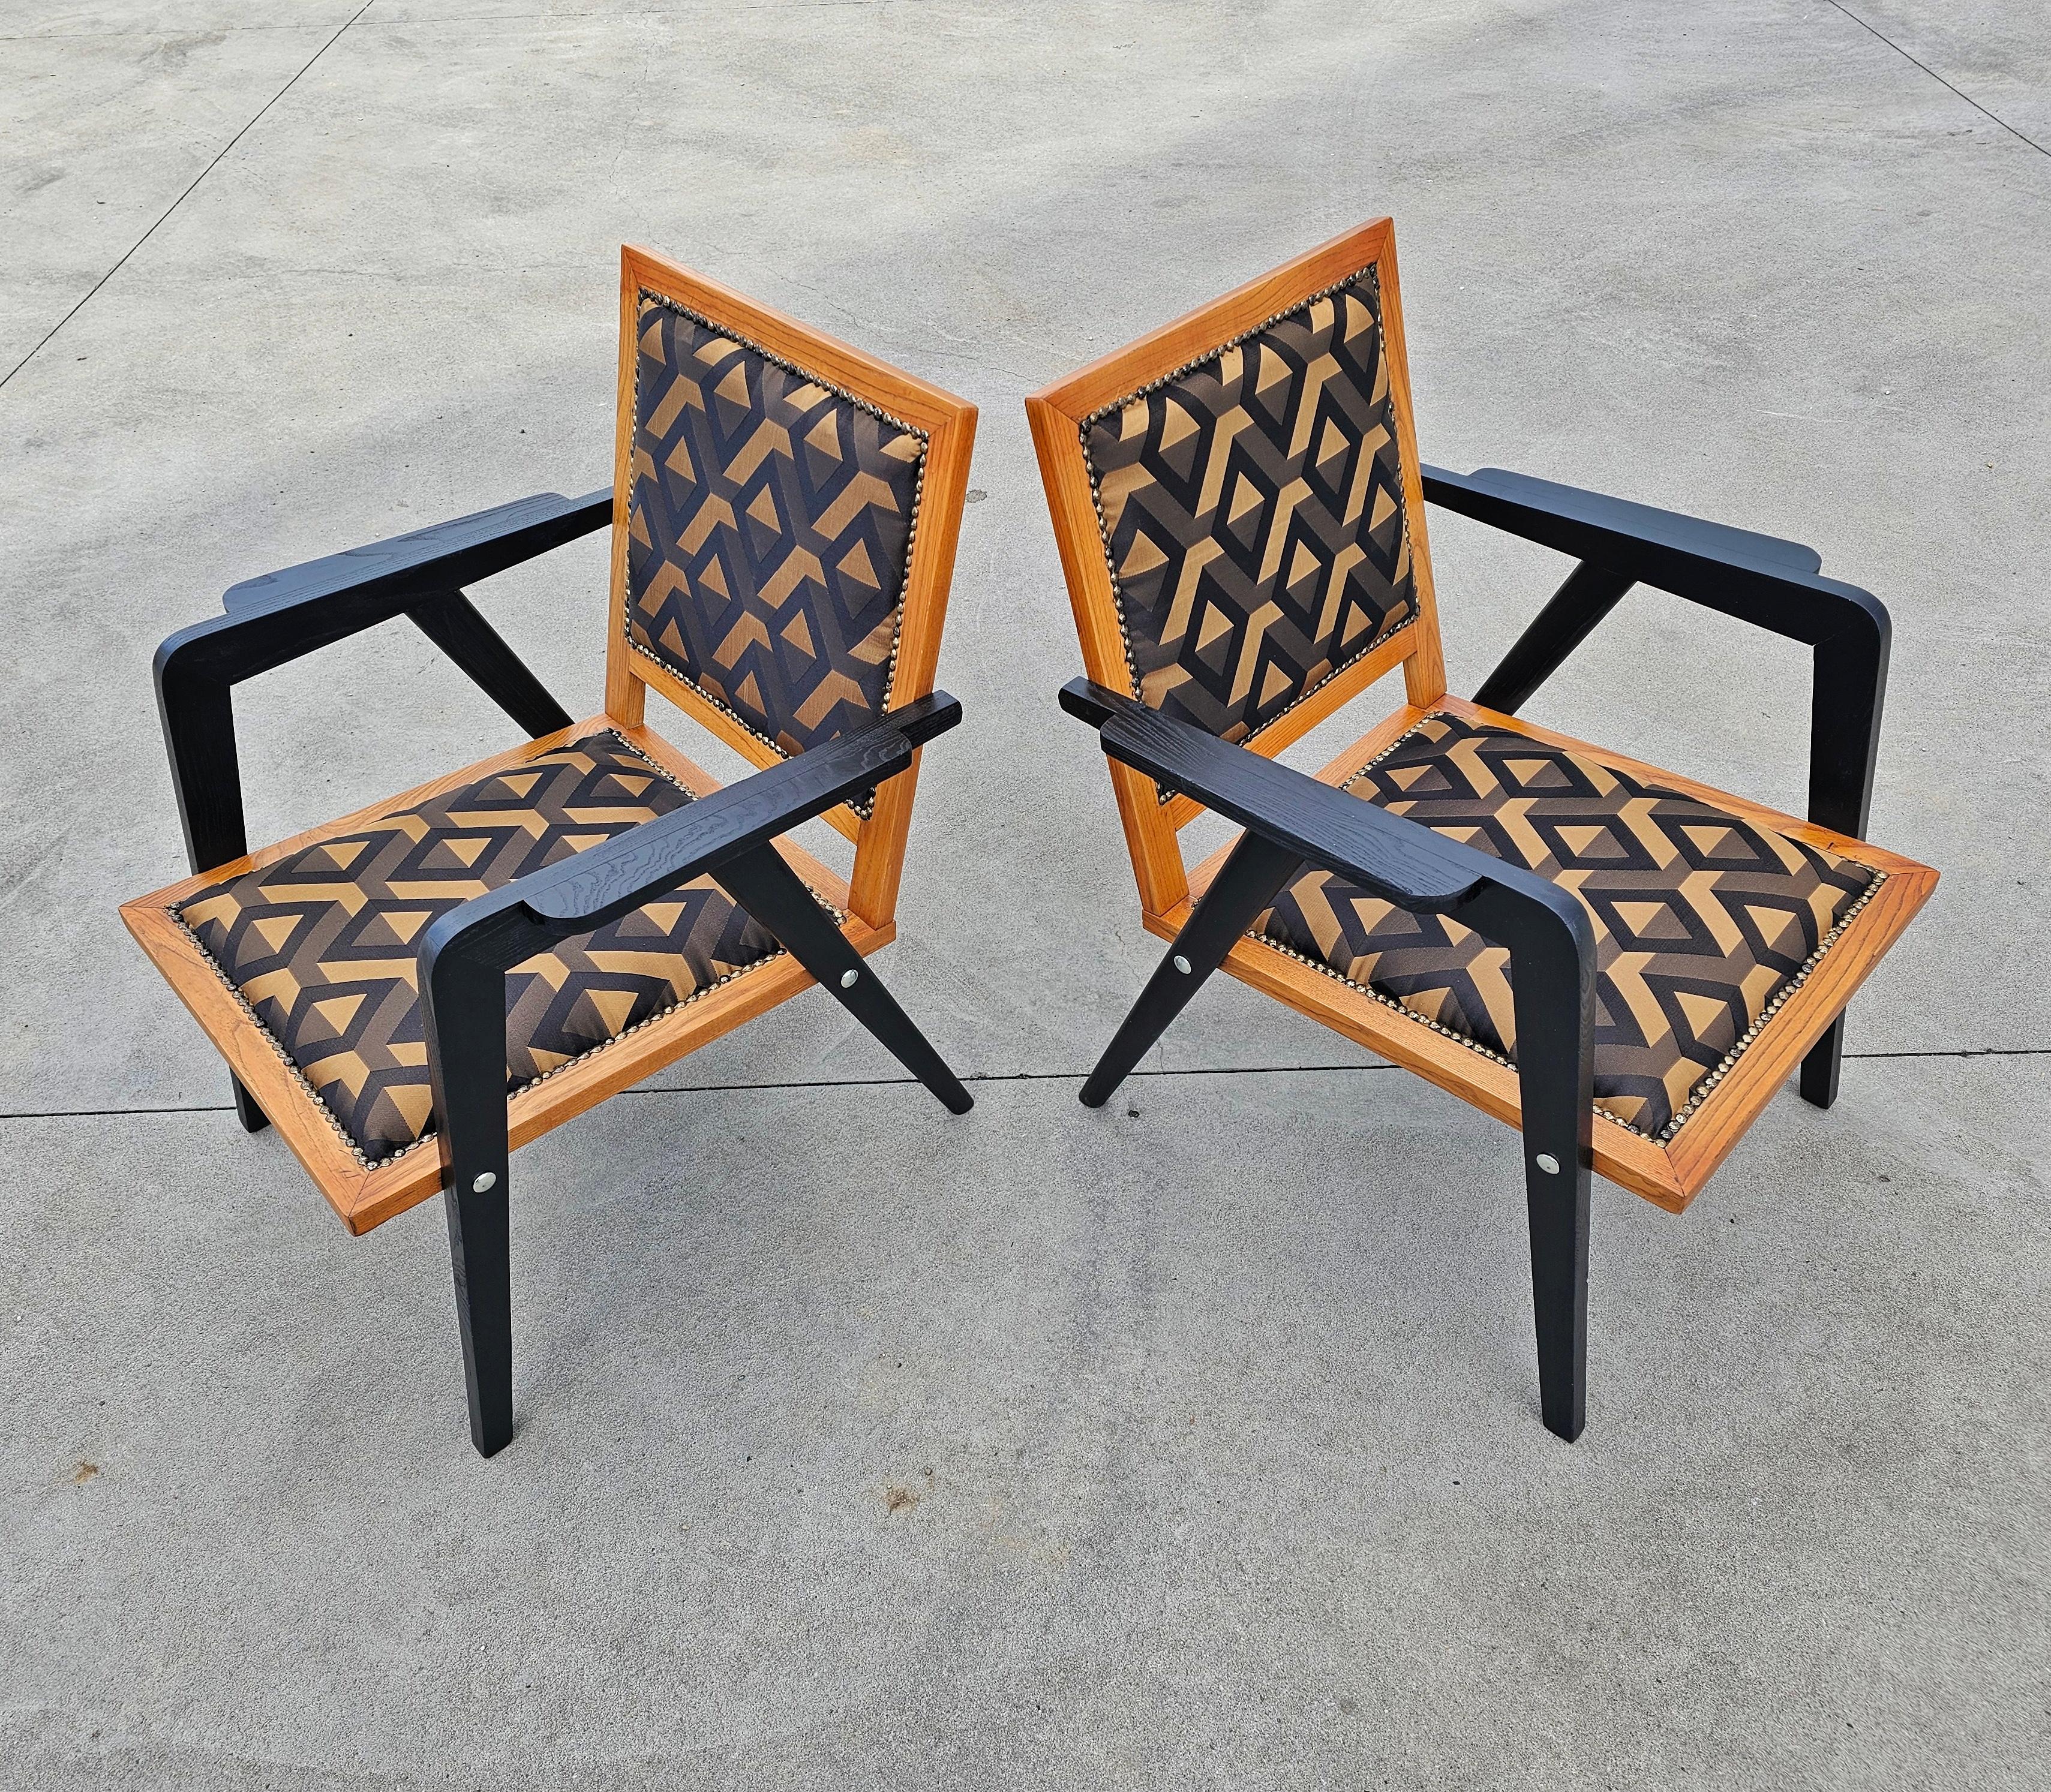 Pair of Rare Mid-Century Modern Armchairs, Fully Refurbished, Yugoslavia, 1950s For Sale 1